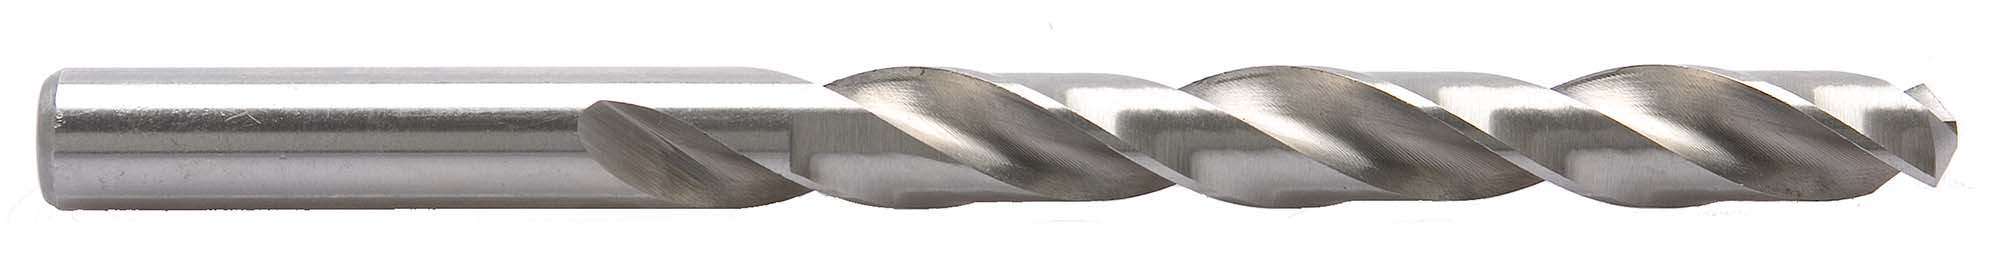 H (.266") Production Quality Bright Finish Jobber Drill Bit, High Speed Steel